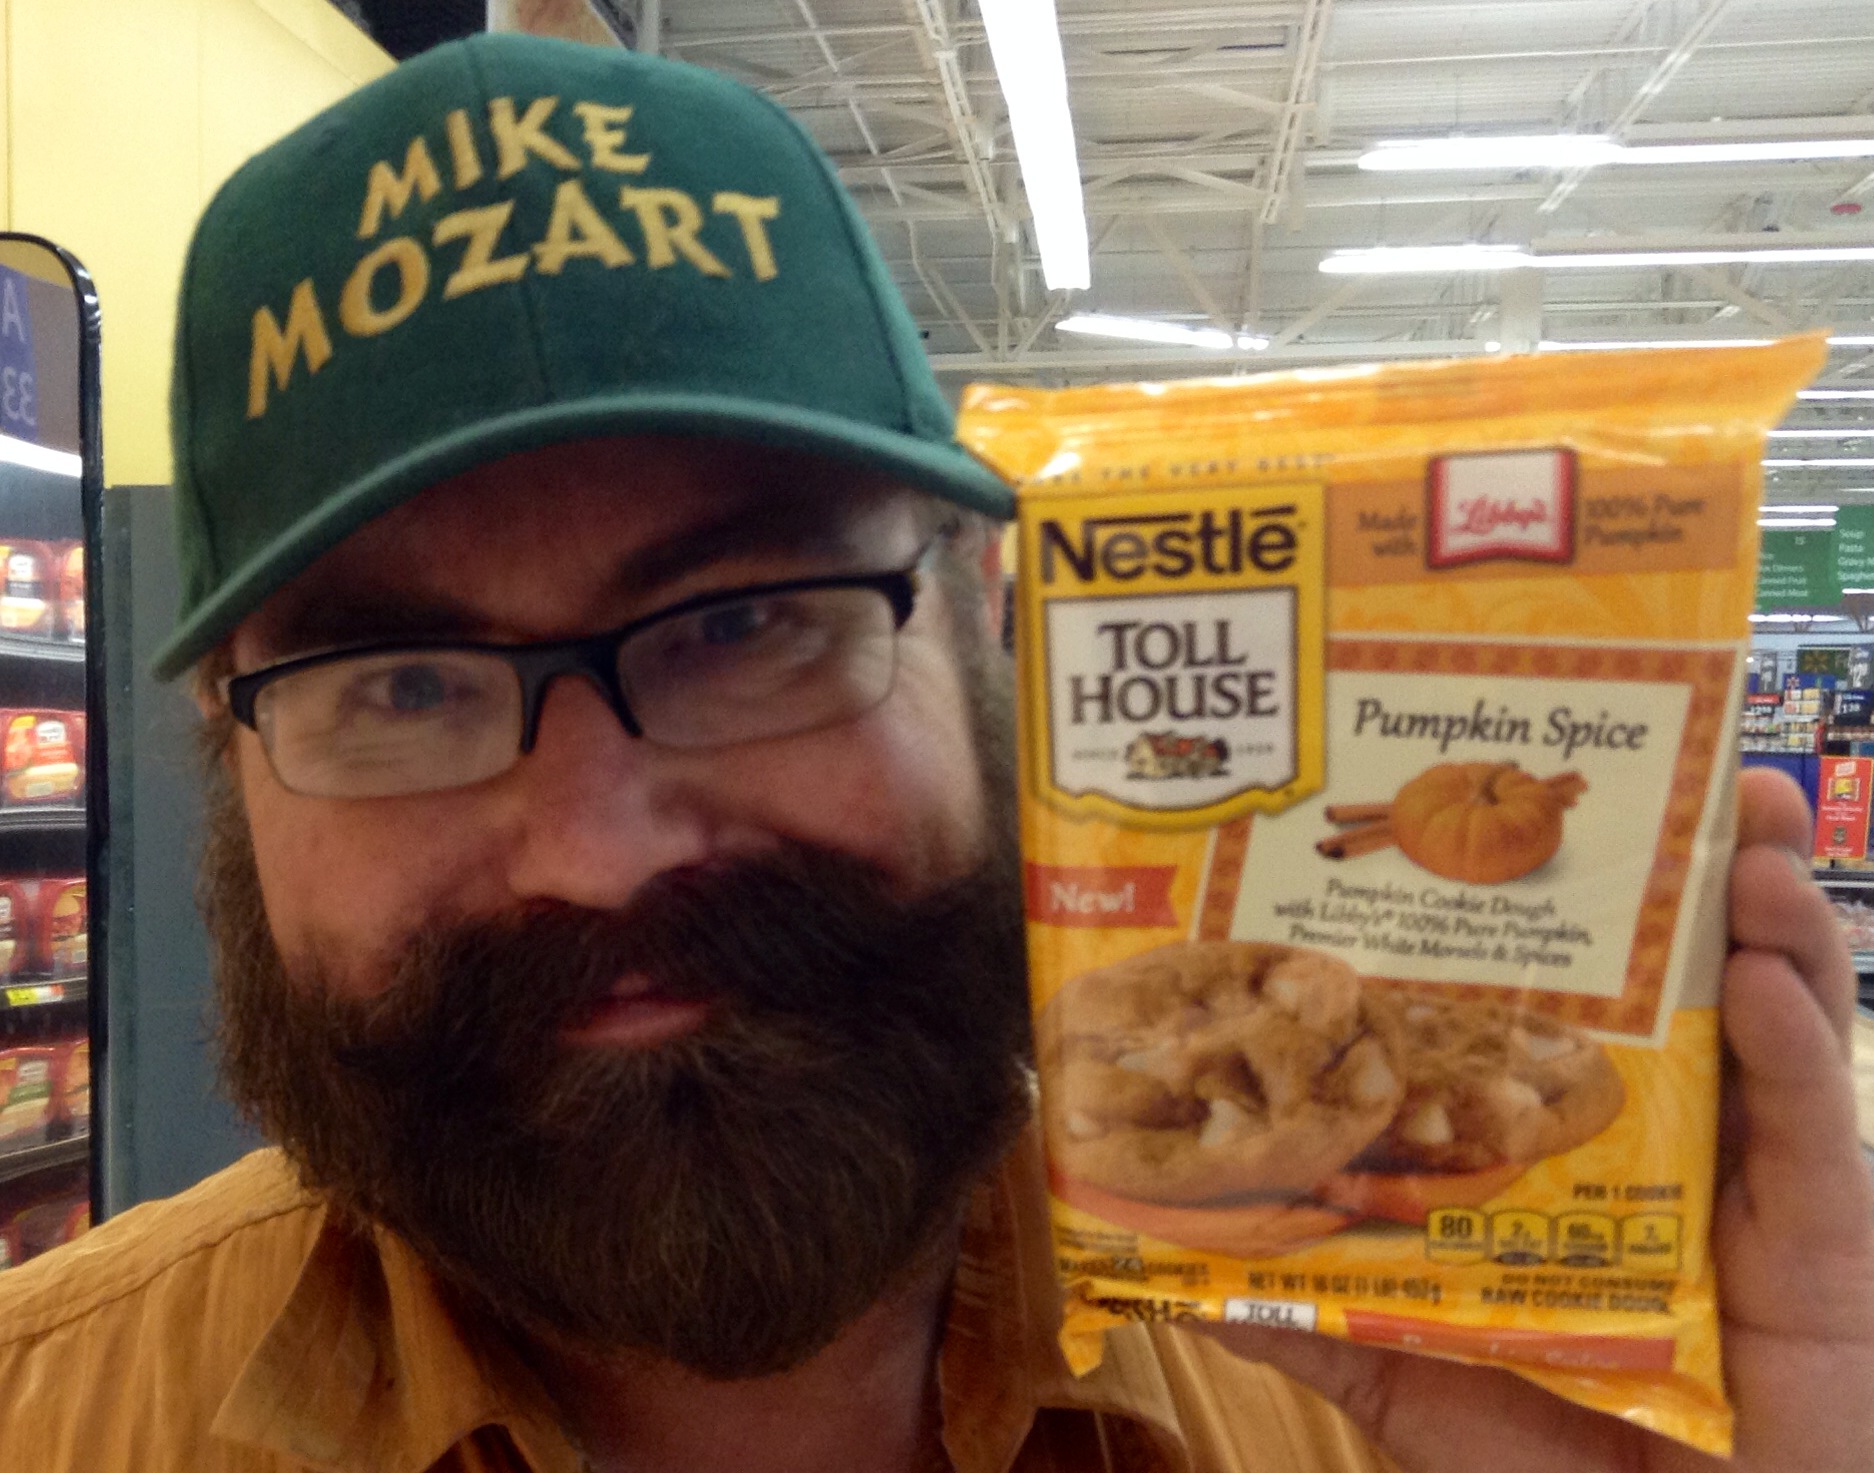 the bearded man with a mustache wearing glasses has a bag of nestle tol house chicken